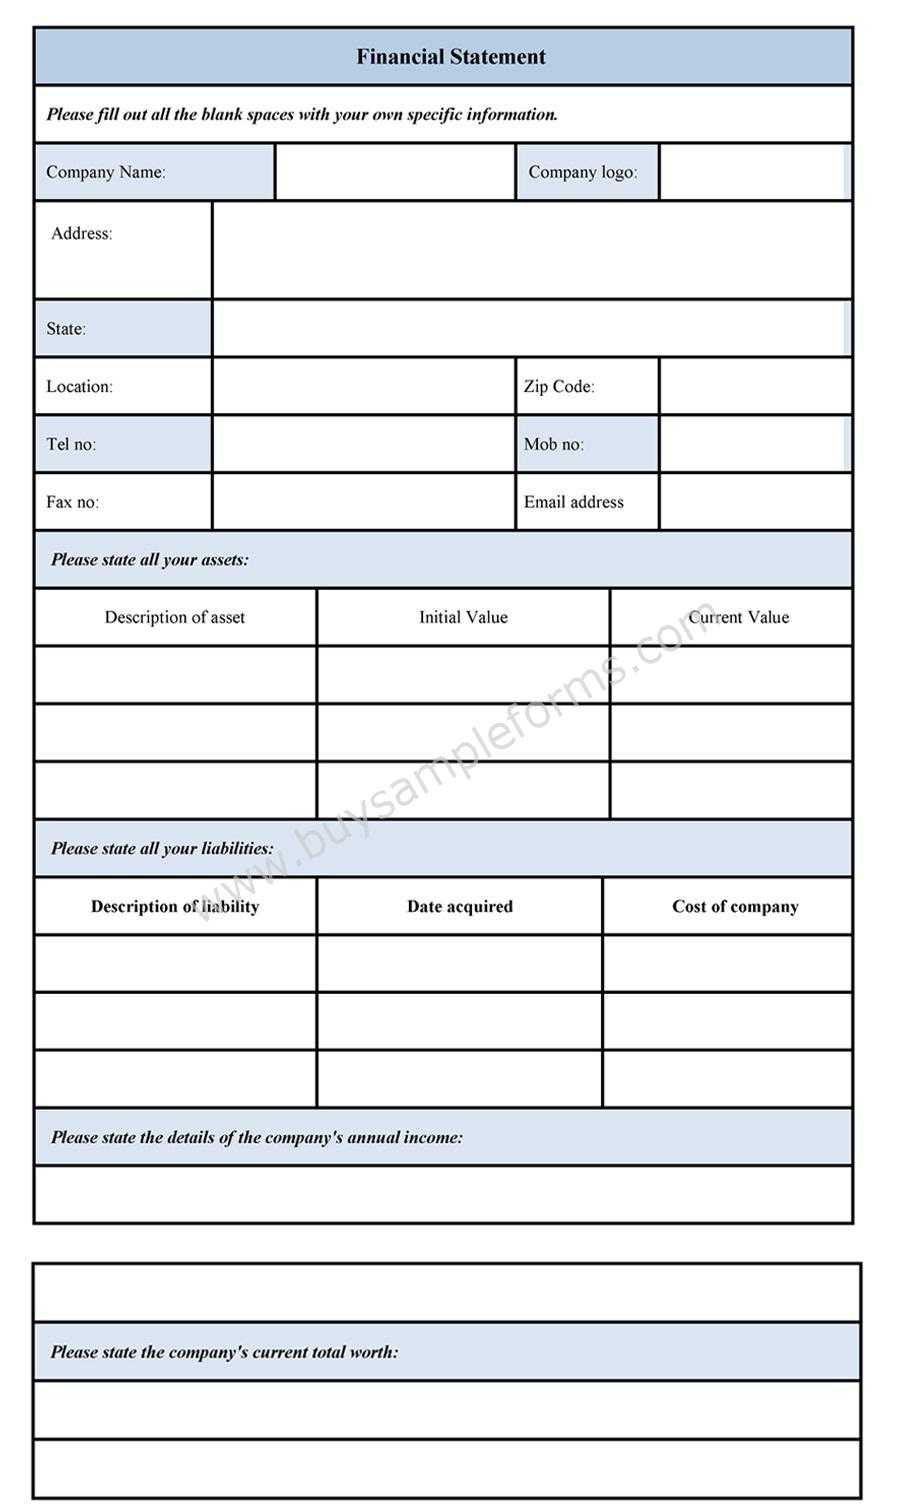 Personal Financial Statement Template Blank Form Sample Pertaining To Blank Personal Financial Statement Template